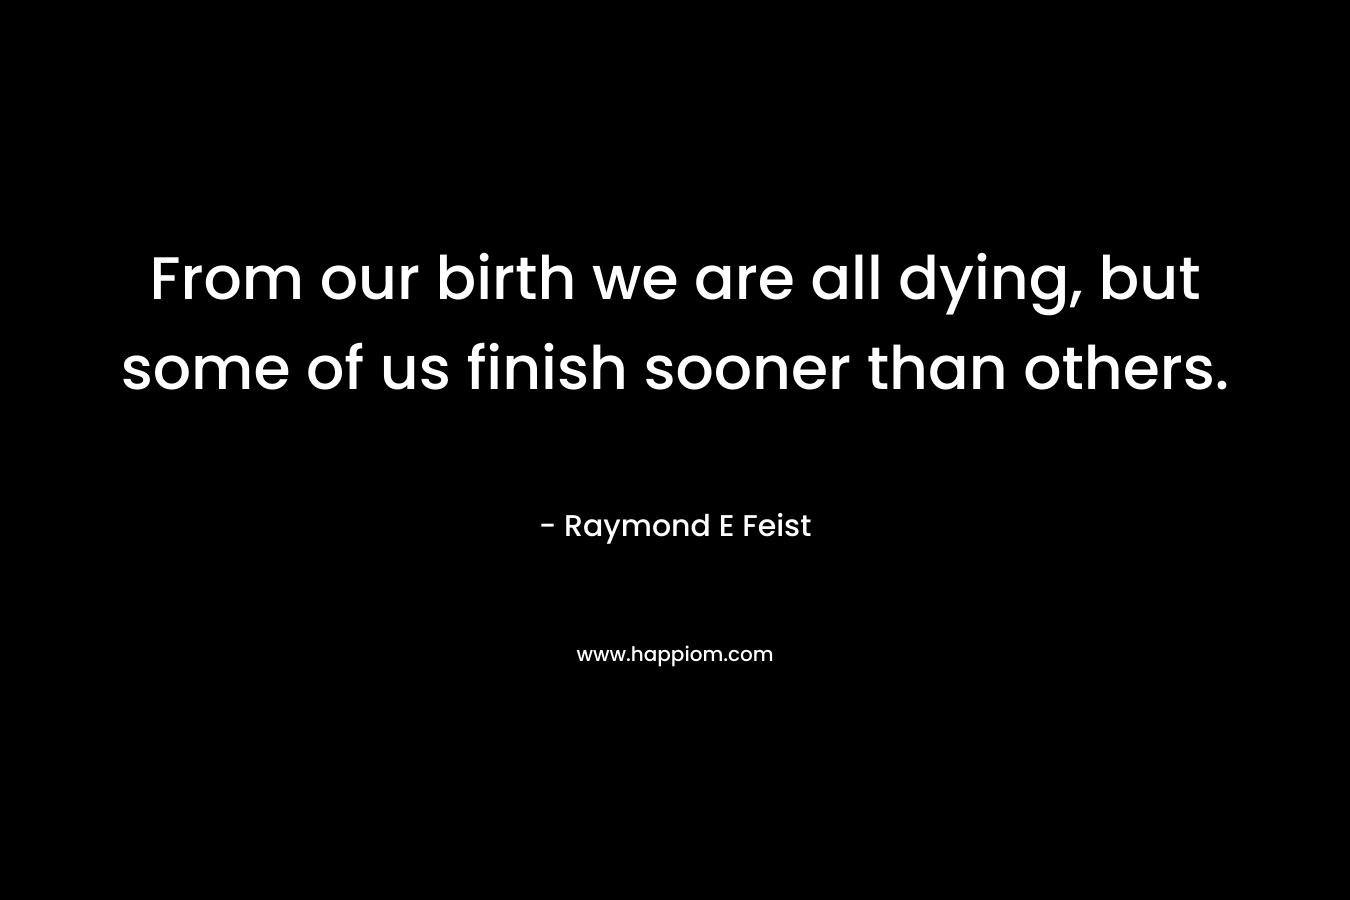 From our birth we are all dying, but some of us finish sooner than others. – Raymond E Feist